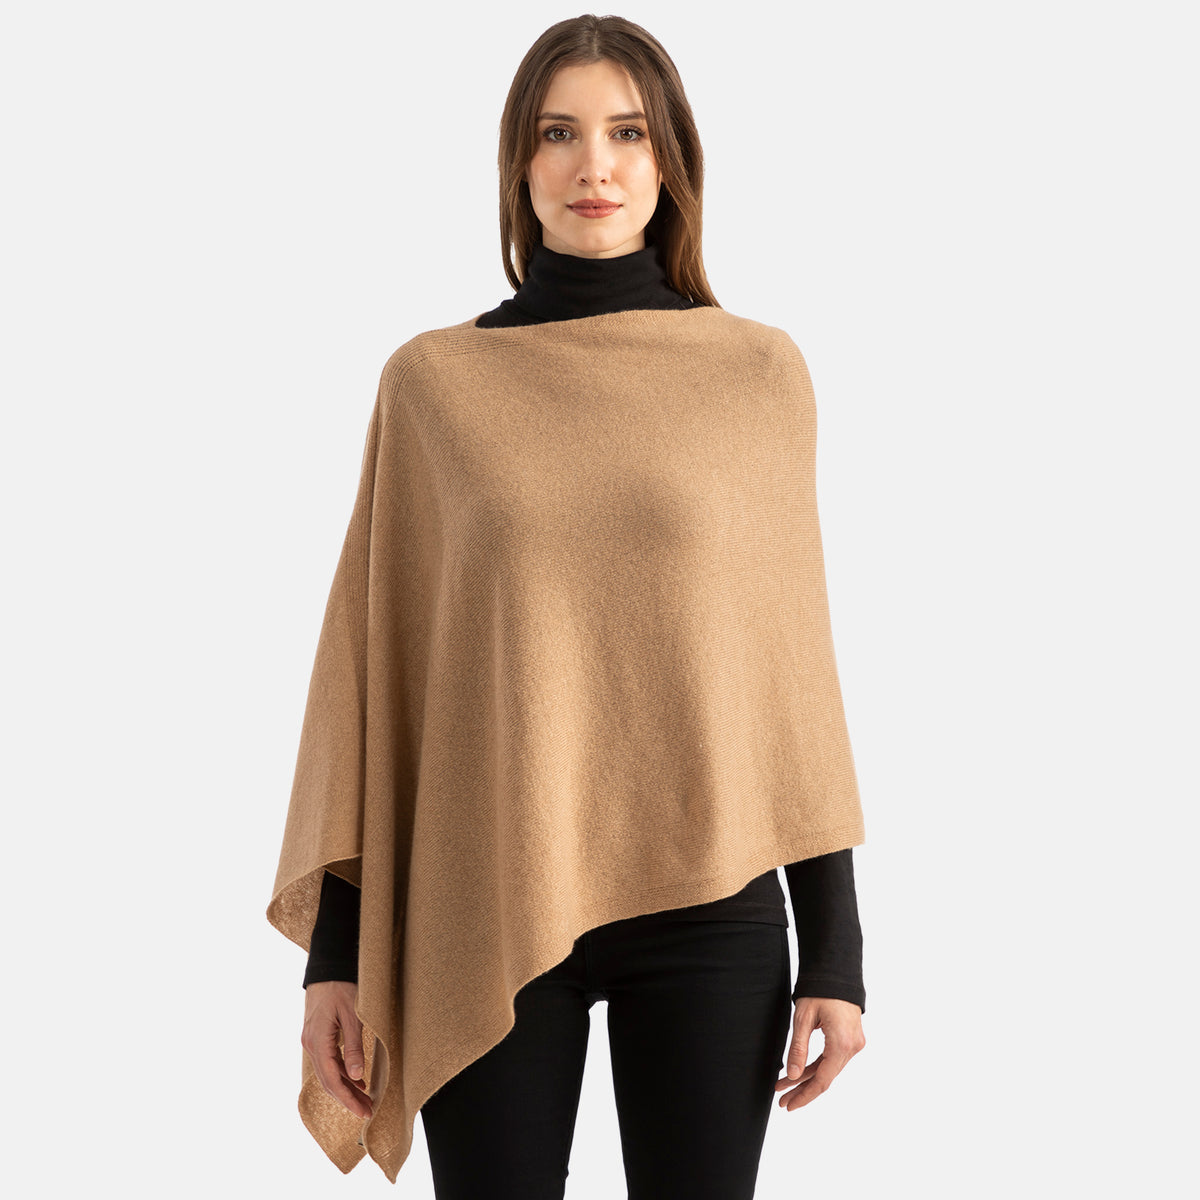 Picture of a woman wearing an asymmetrical ove the head poncho, light pink.